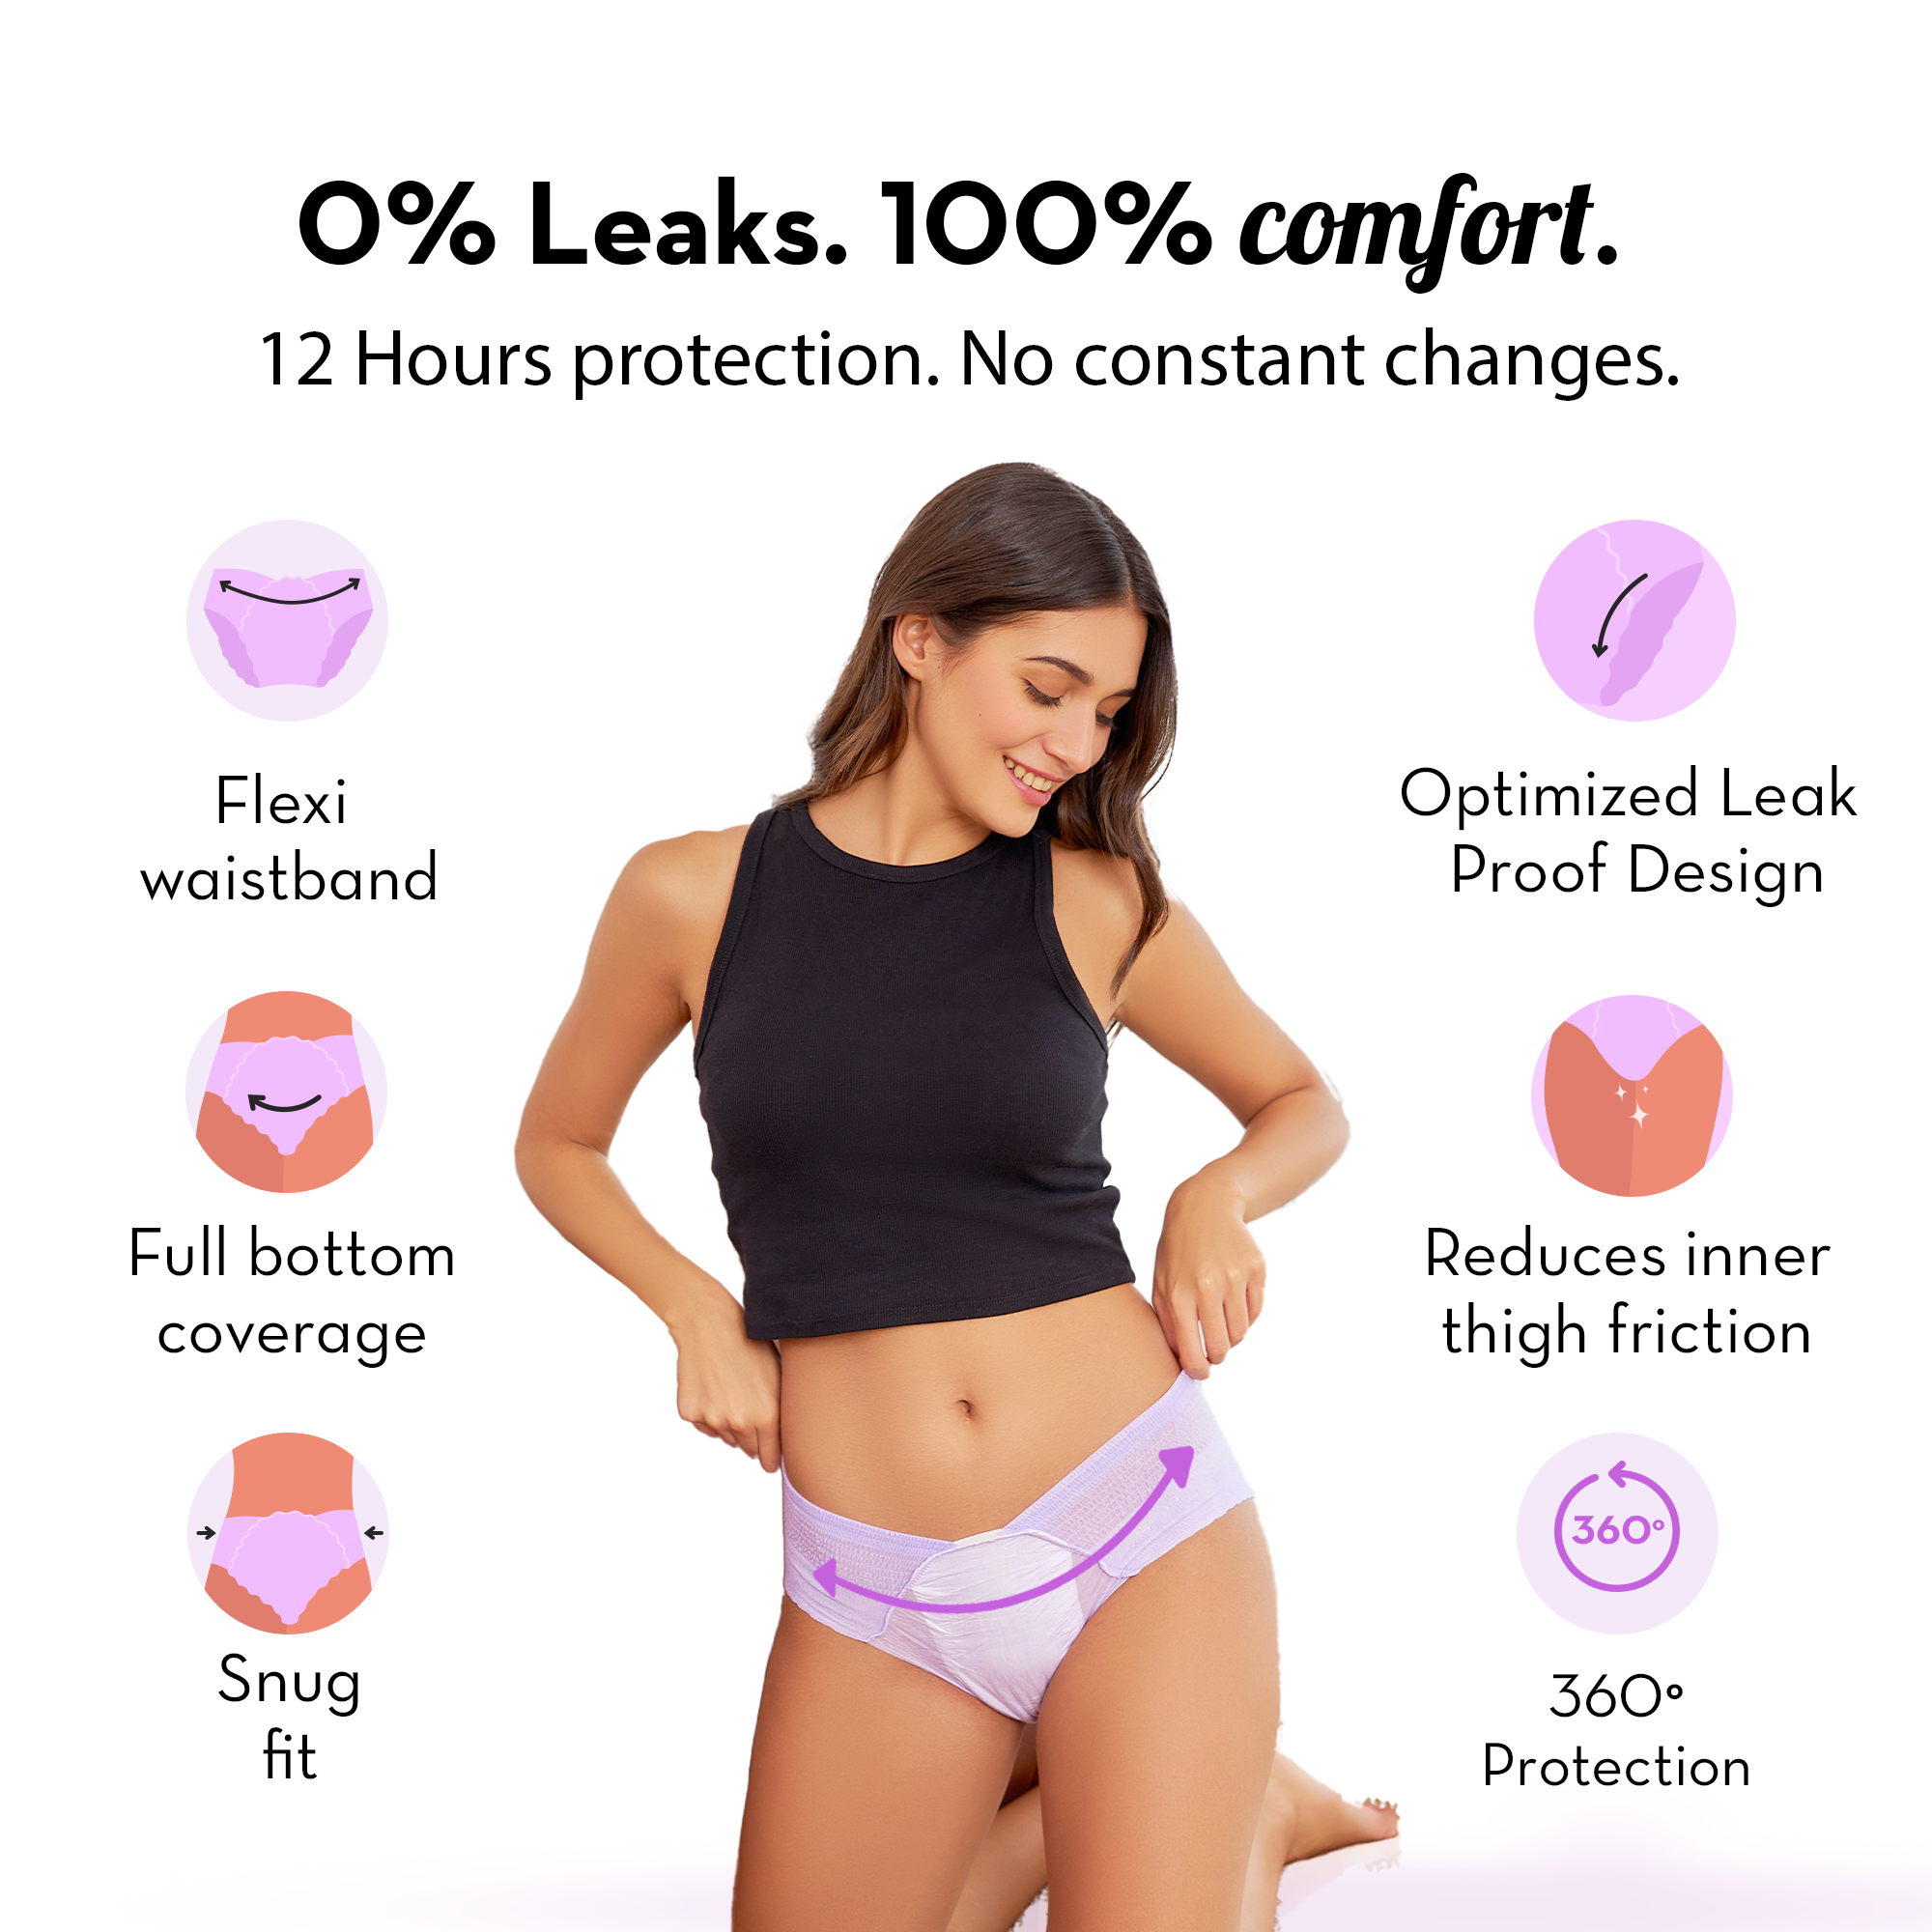 Period panty for women